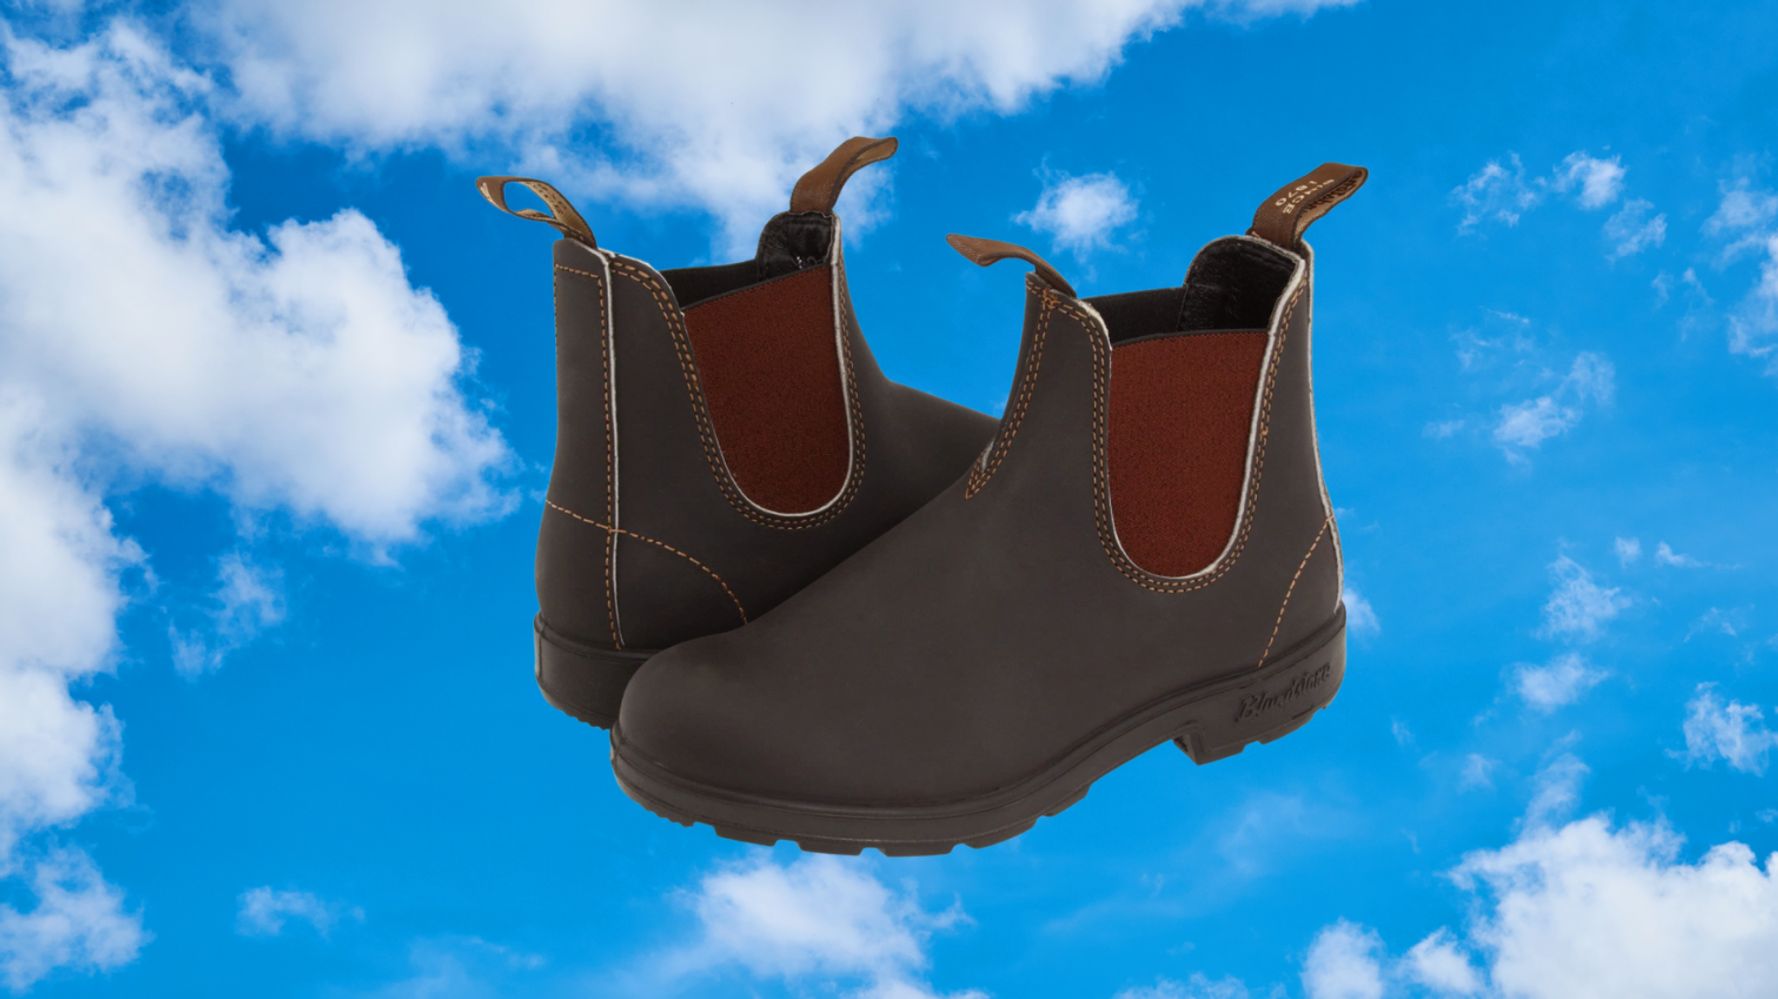 What Is The Deal With Blundstones? This Lugged-Sole Chelsea Boot Is Taking  Over